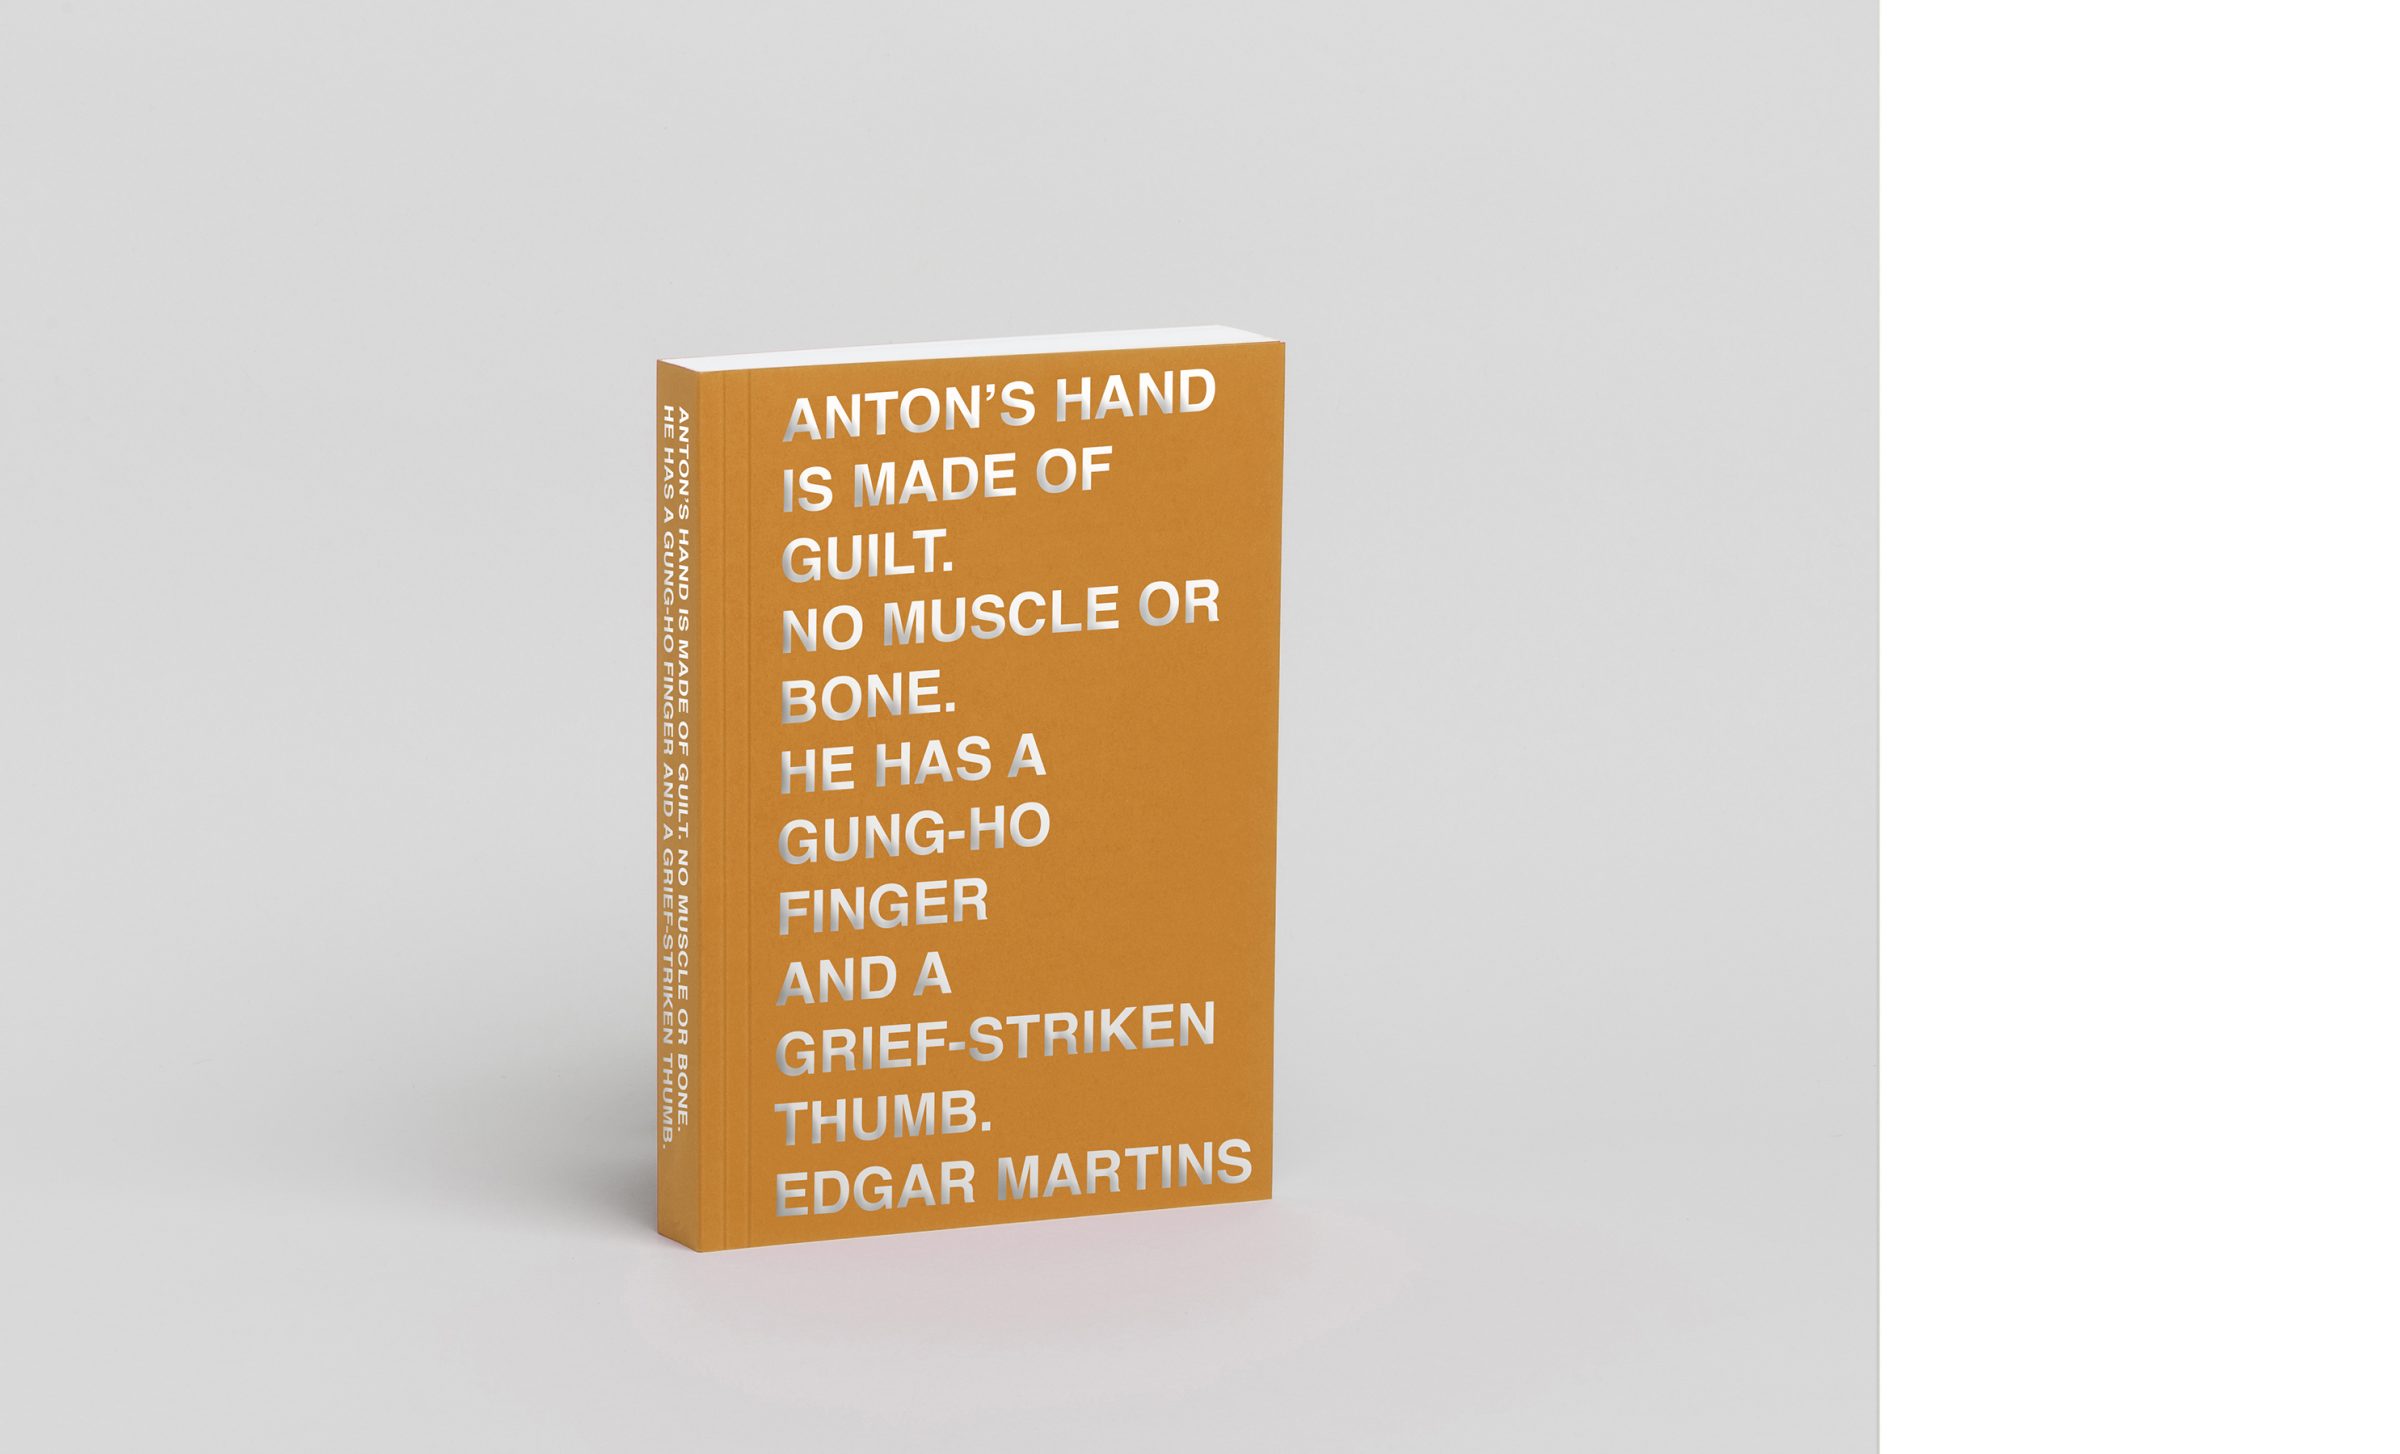 'Anton's Hand is Made of Guilt. No Muscle or Bone. He has a Gung-ho Finger and a Grief-stricken Thumb.' is now available to pre-order